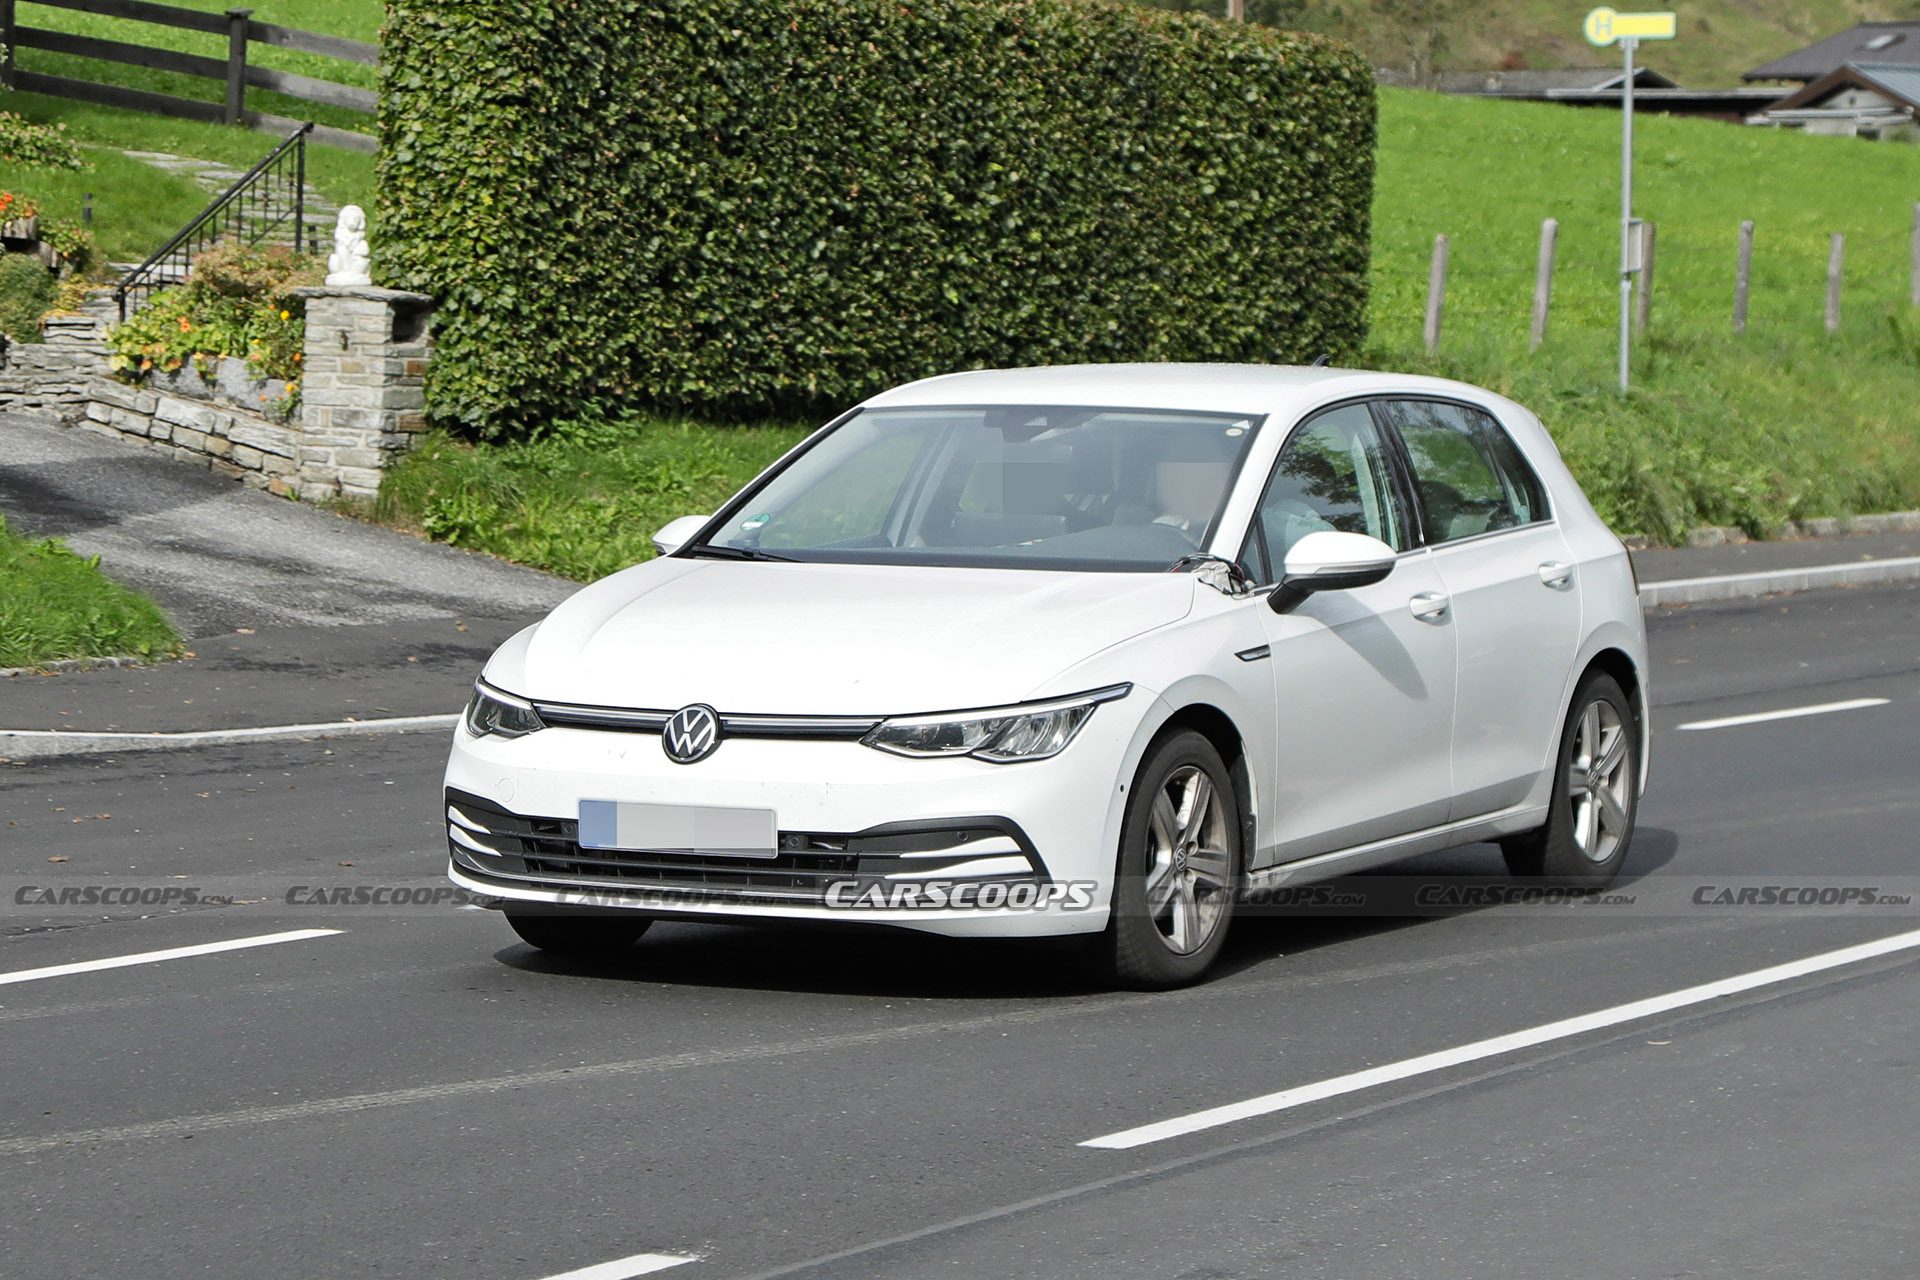 Volkswagen Golf Test Mule Spied With Massive New Touchscreen Inside